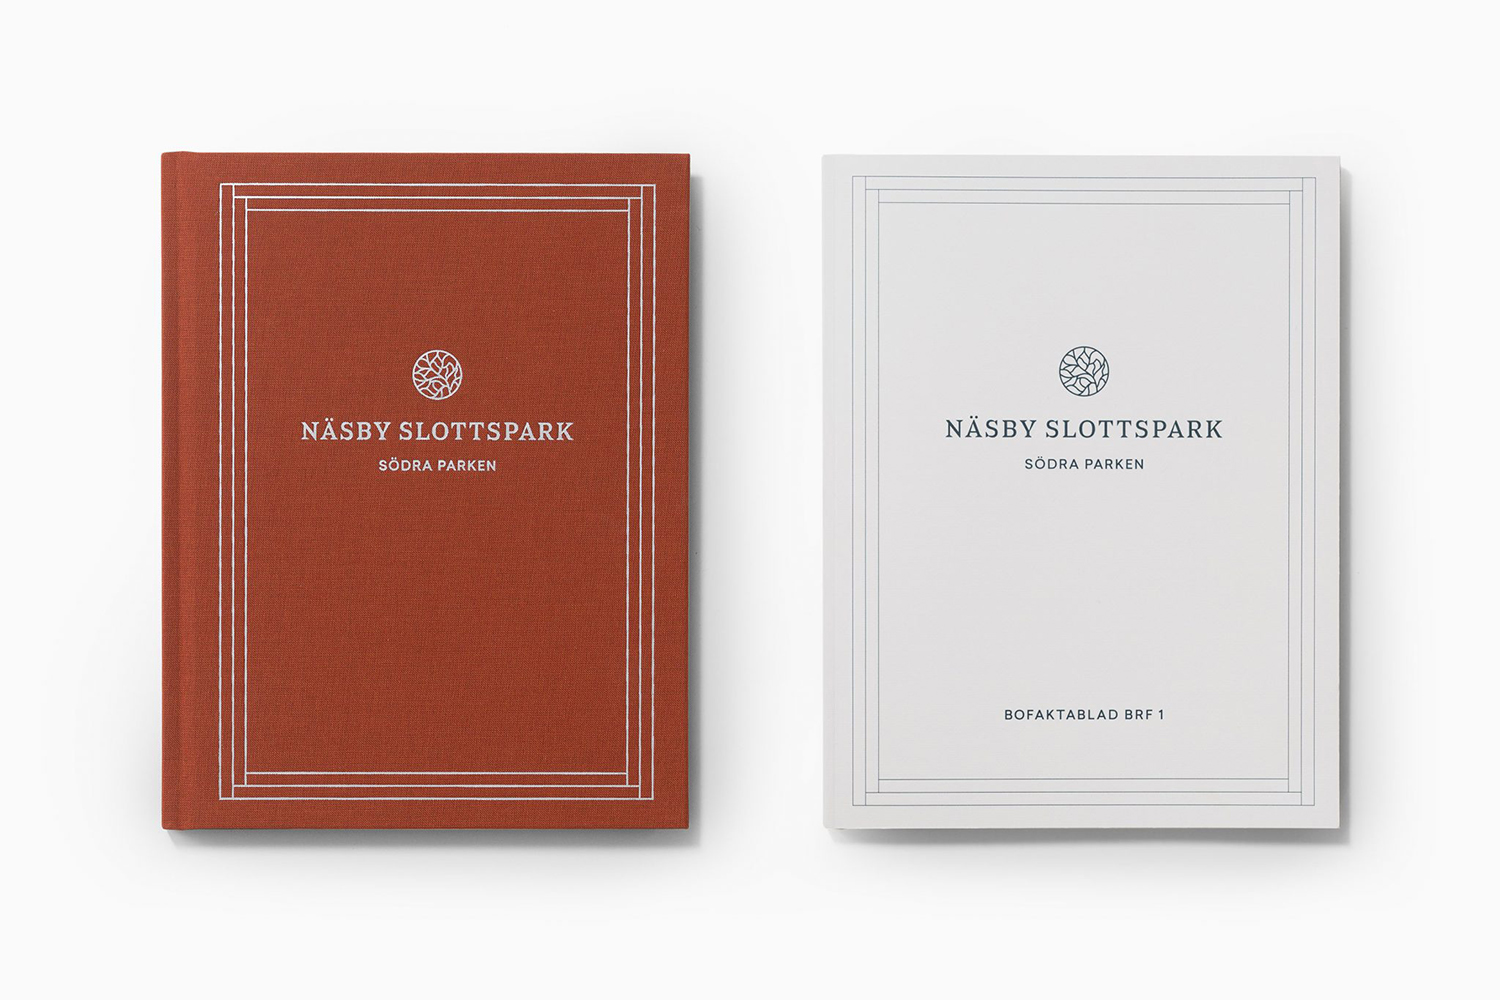 Logo and brochure design by Bedow for Swedish property development Näsby Slottspark